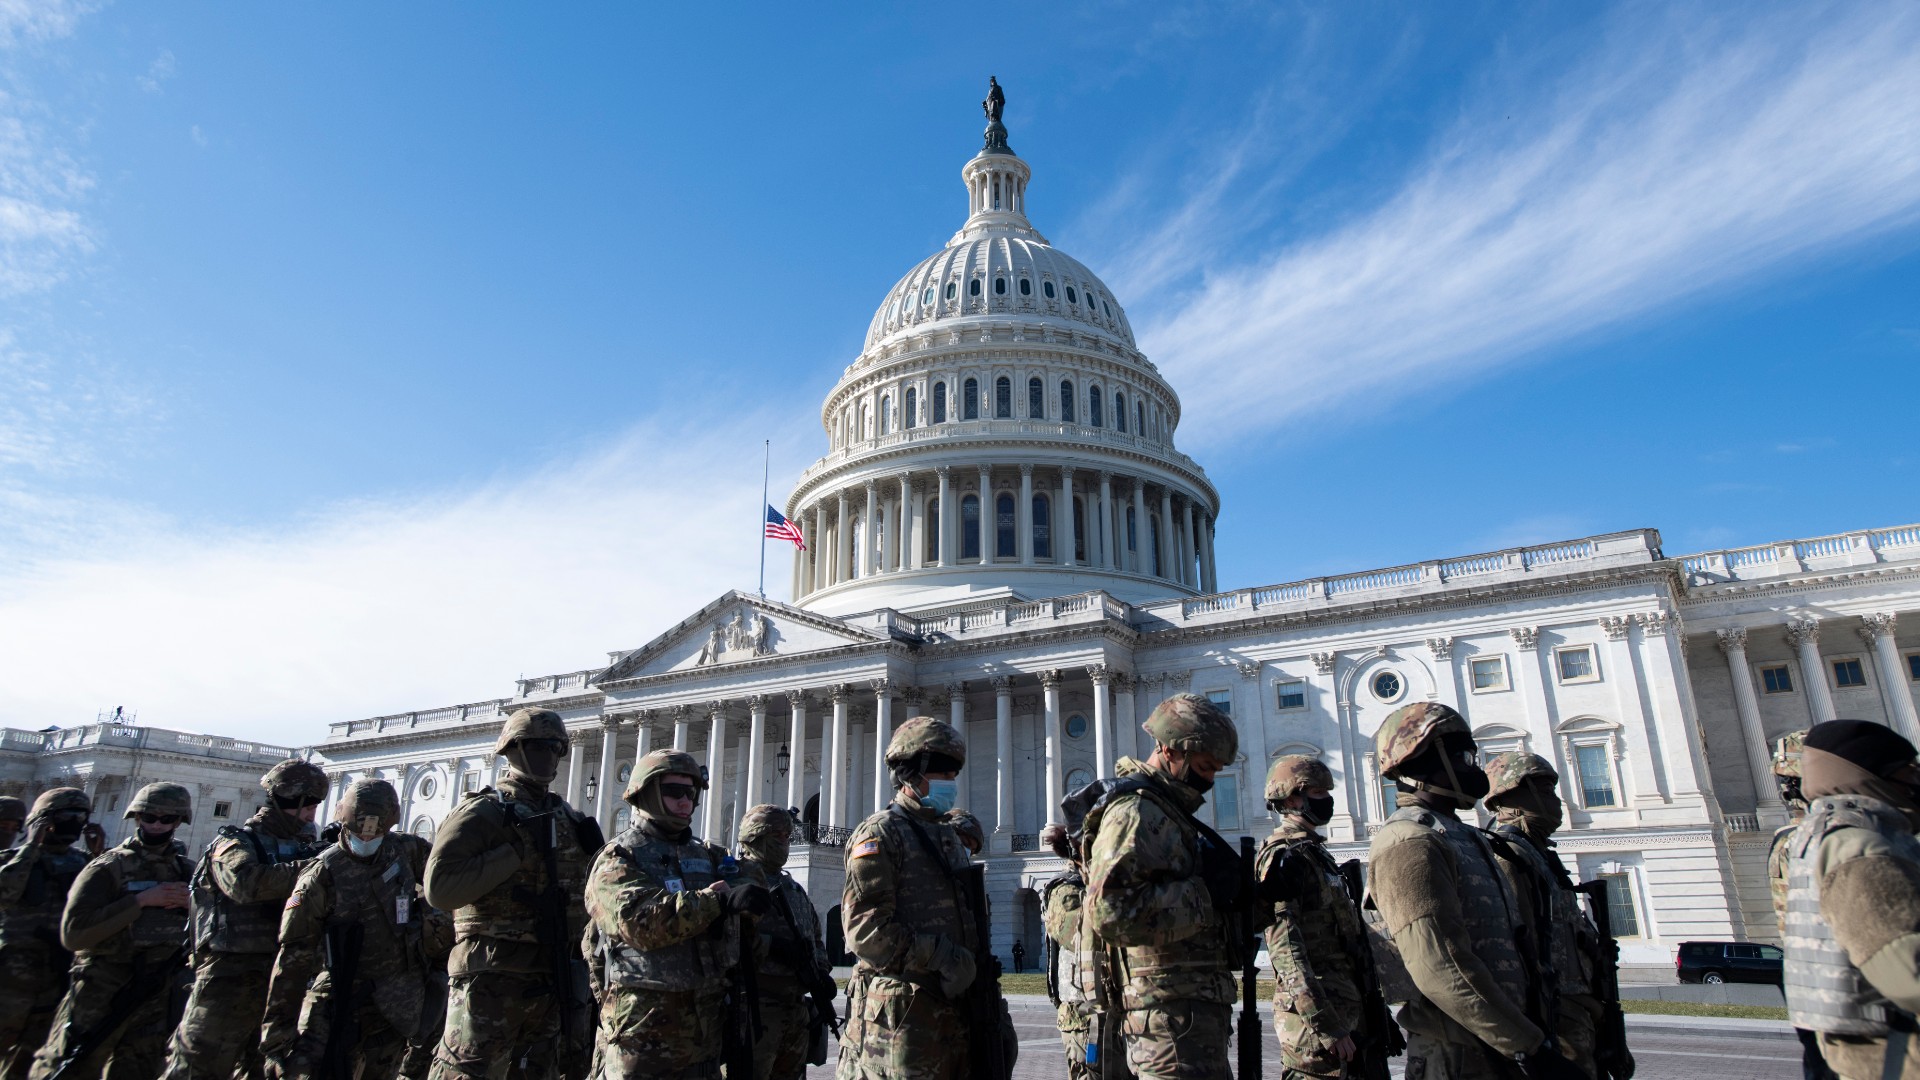 Washington Under Lockdown: A Tour of the Capitol Under Military Watch